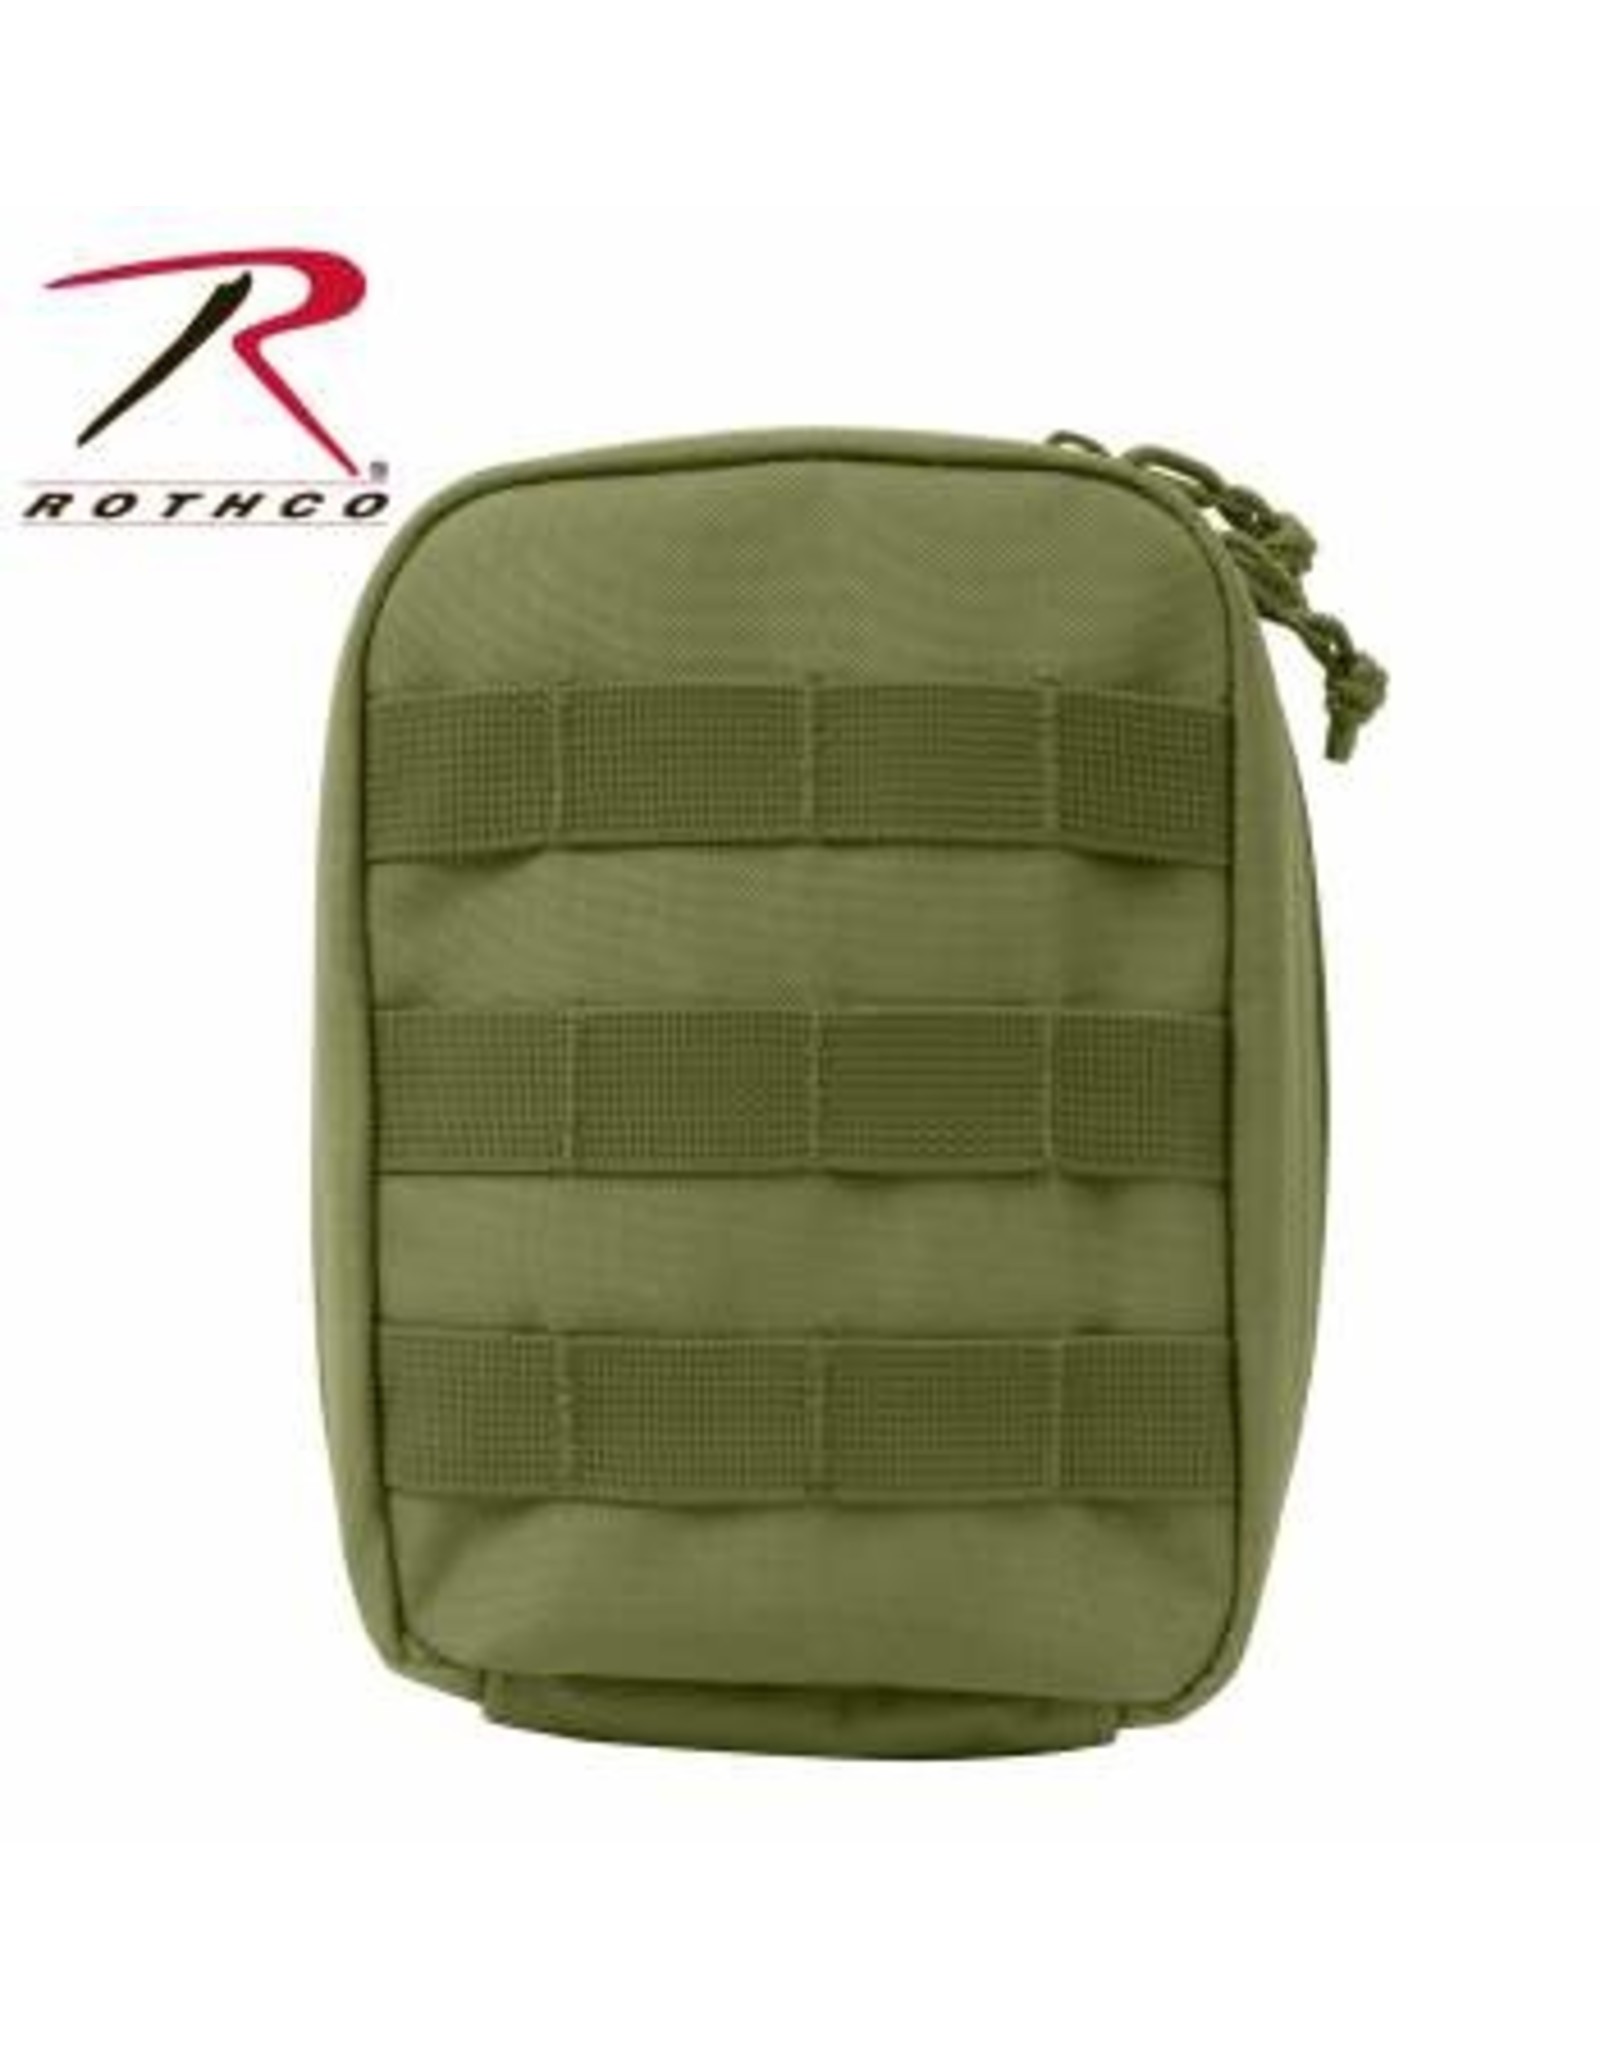 ROTHCO MOLLE-POUCH TACTICAL FIRST AID POUCH